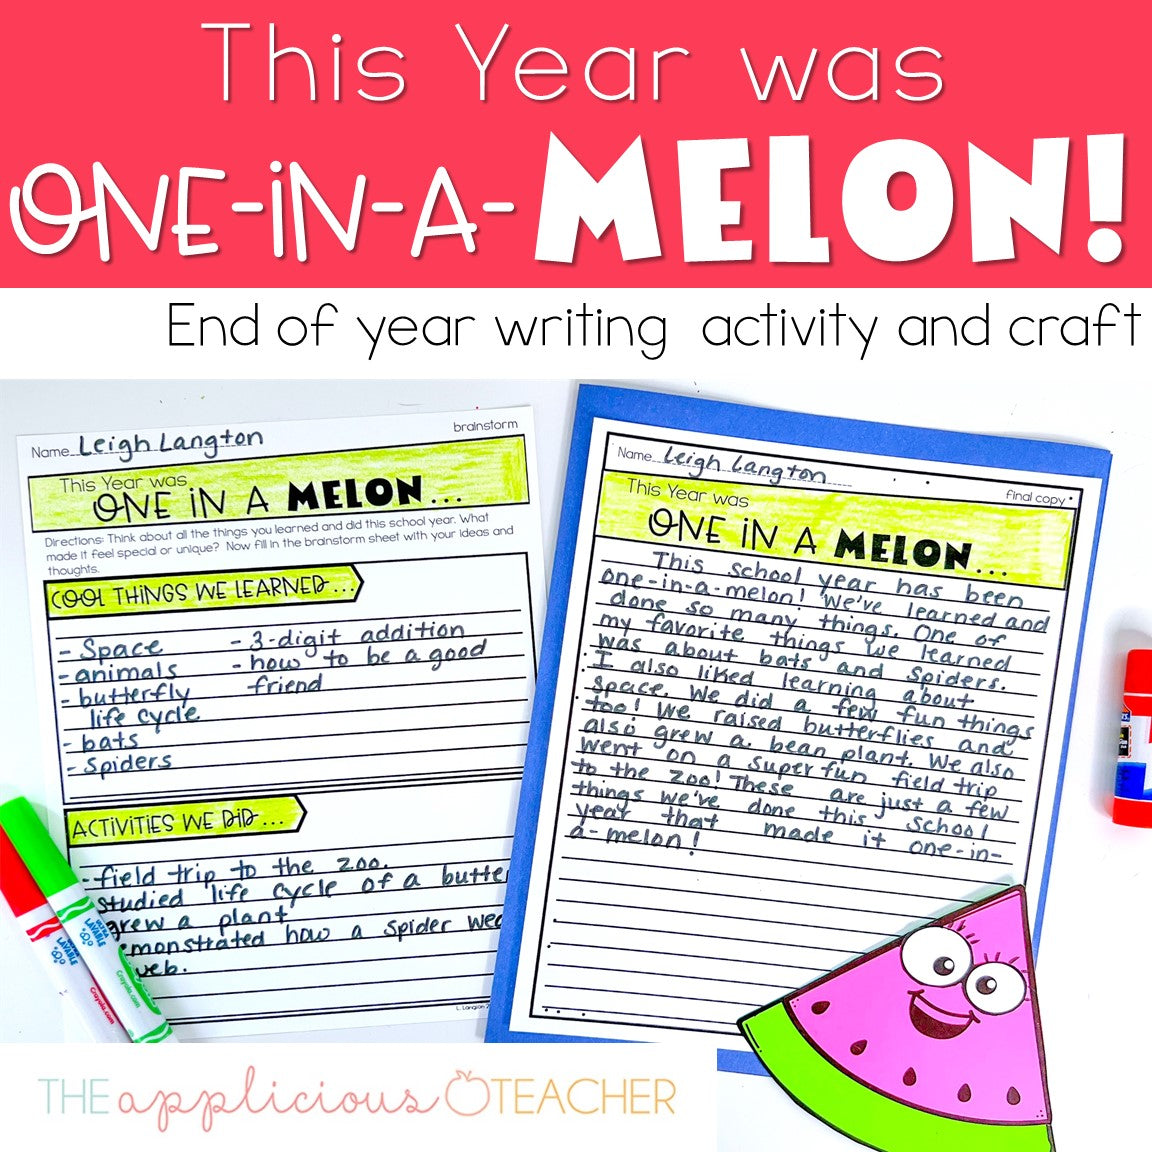 End of Year Writing Activity and Craft This Year Was One in a Melon